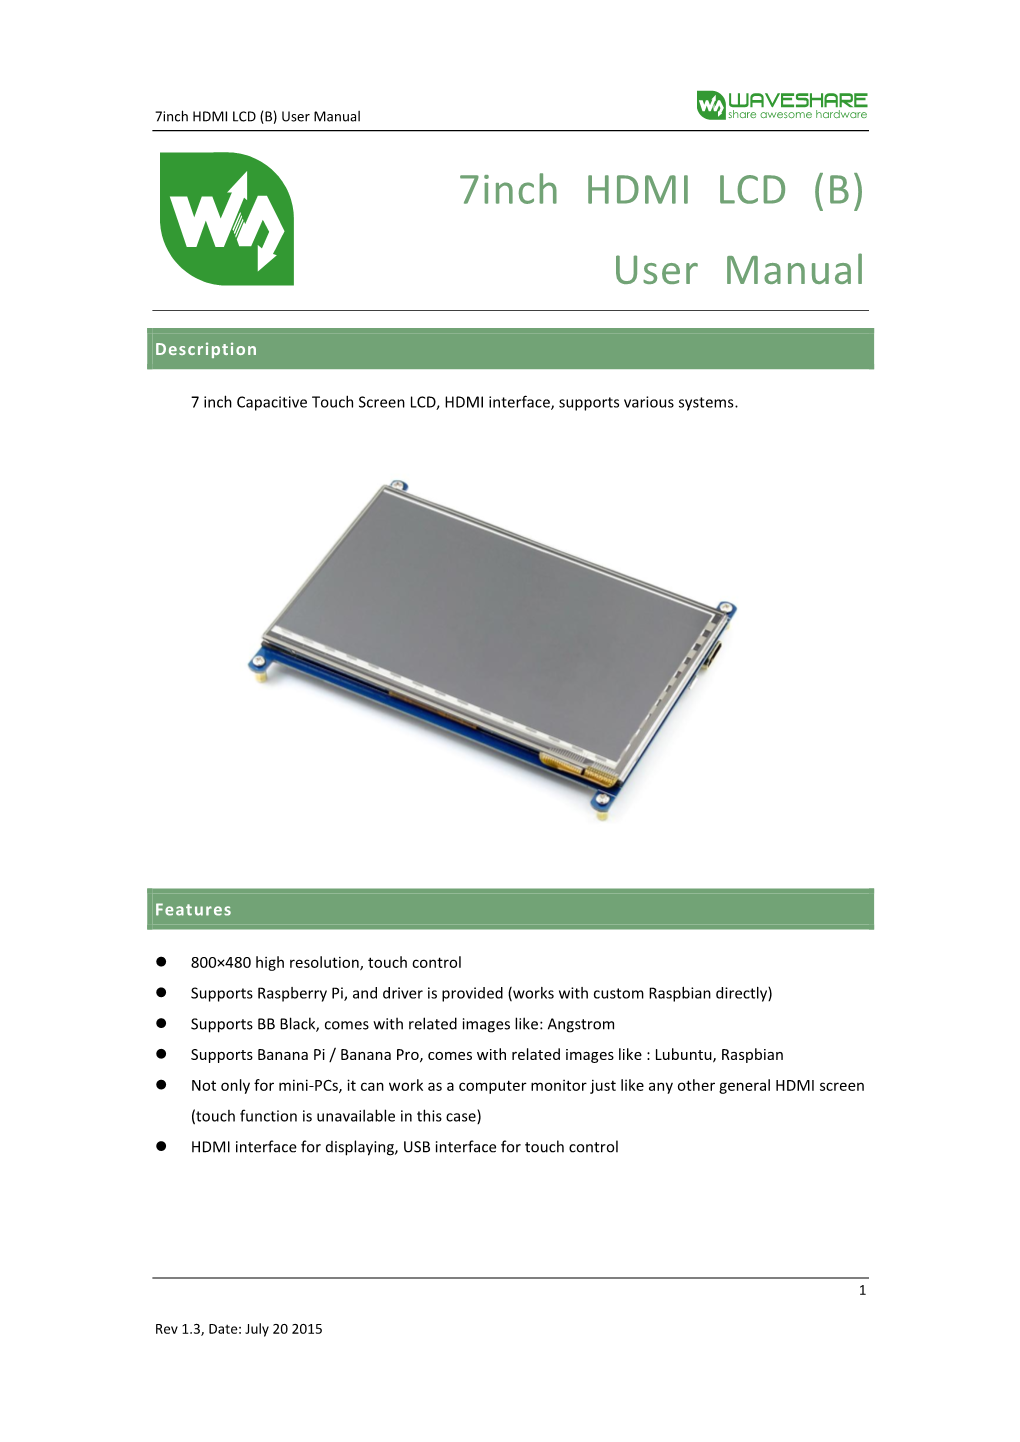 7Inch HDMI LCD (B) User Manual Share Awesome Hardware